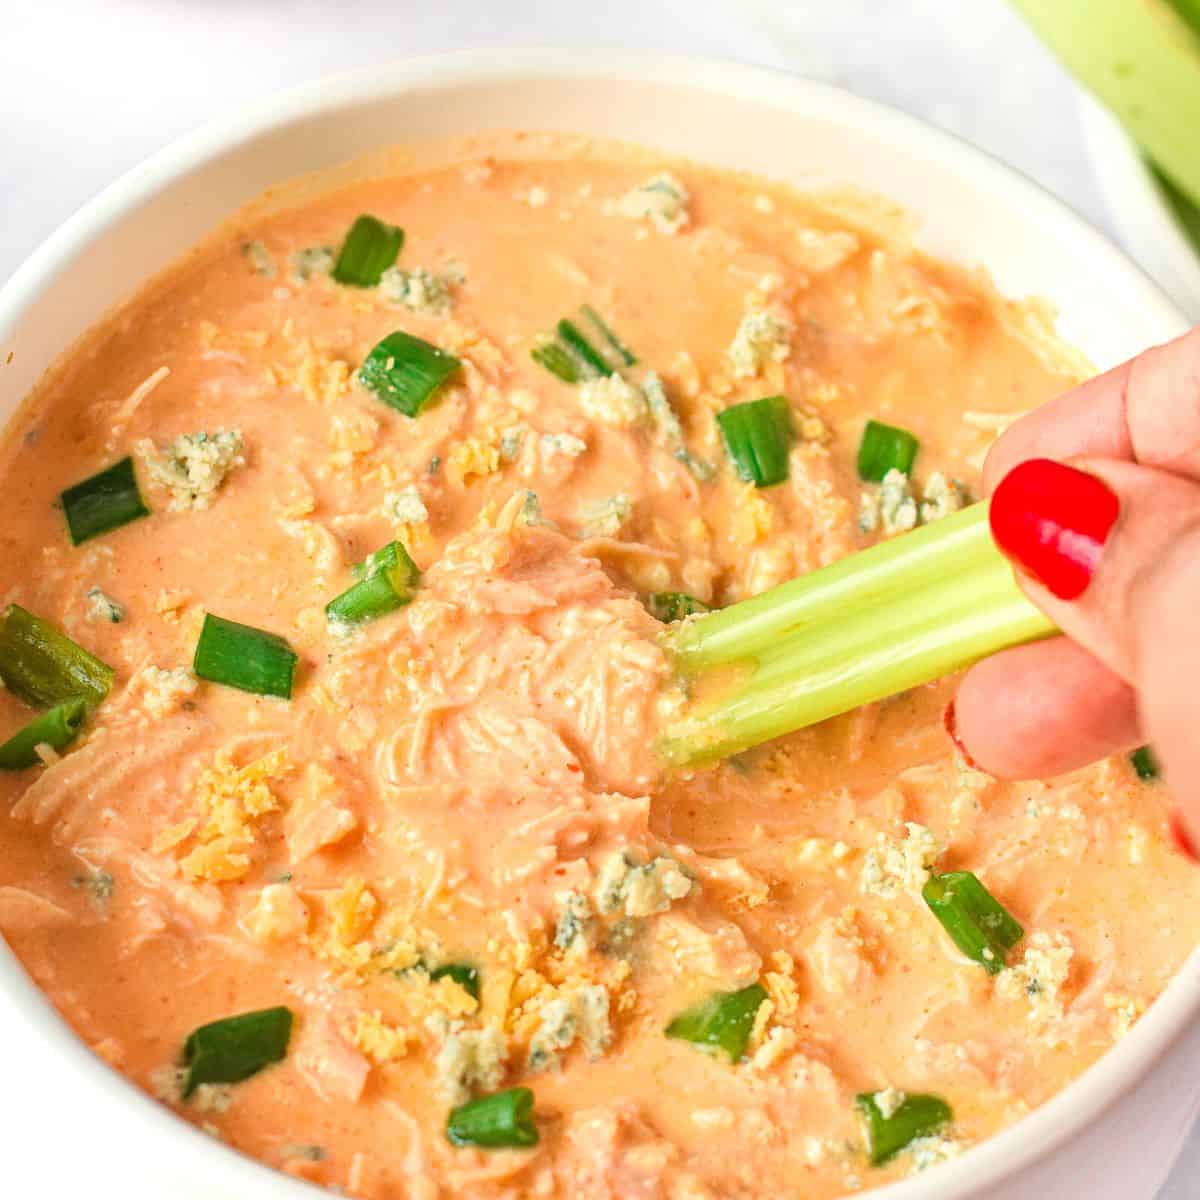 Instant Pot Buffalo Chicken Dip, a delicious, quick, and simple creamy appetizer recipe made with cheese and hot sauce.